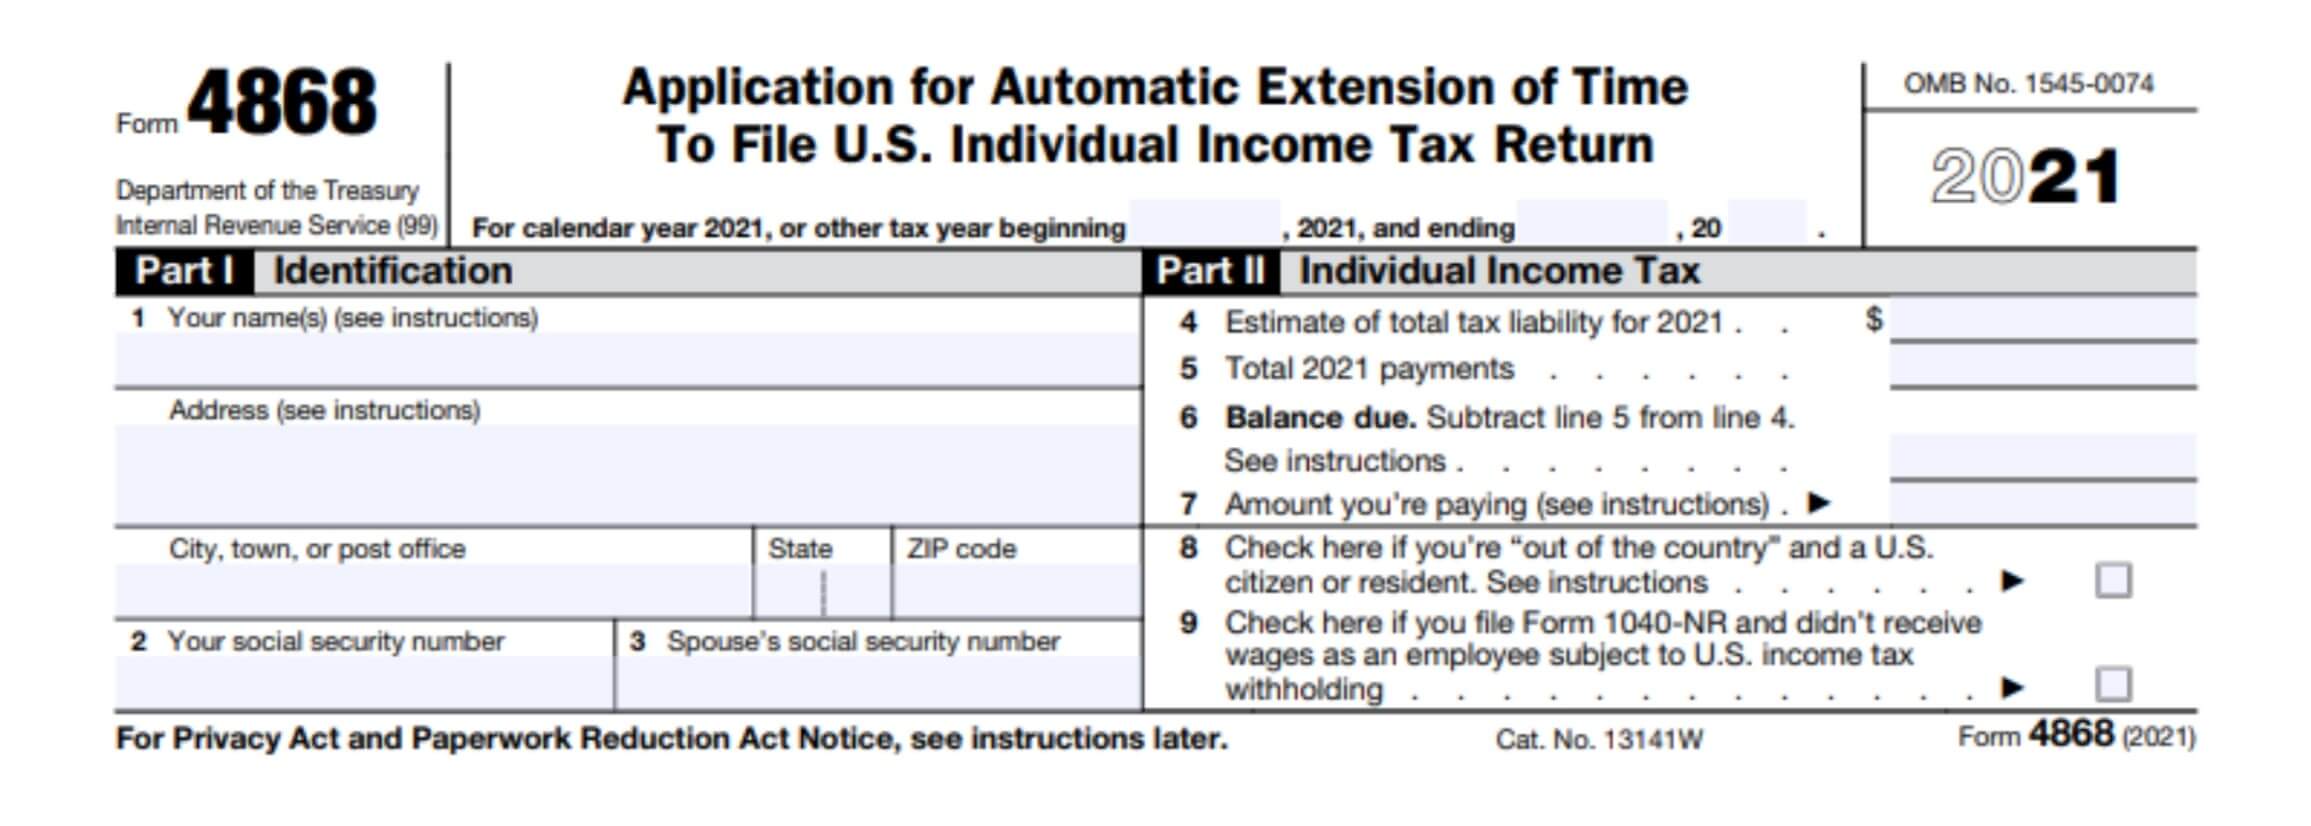 irs form-4868 example